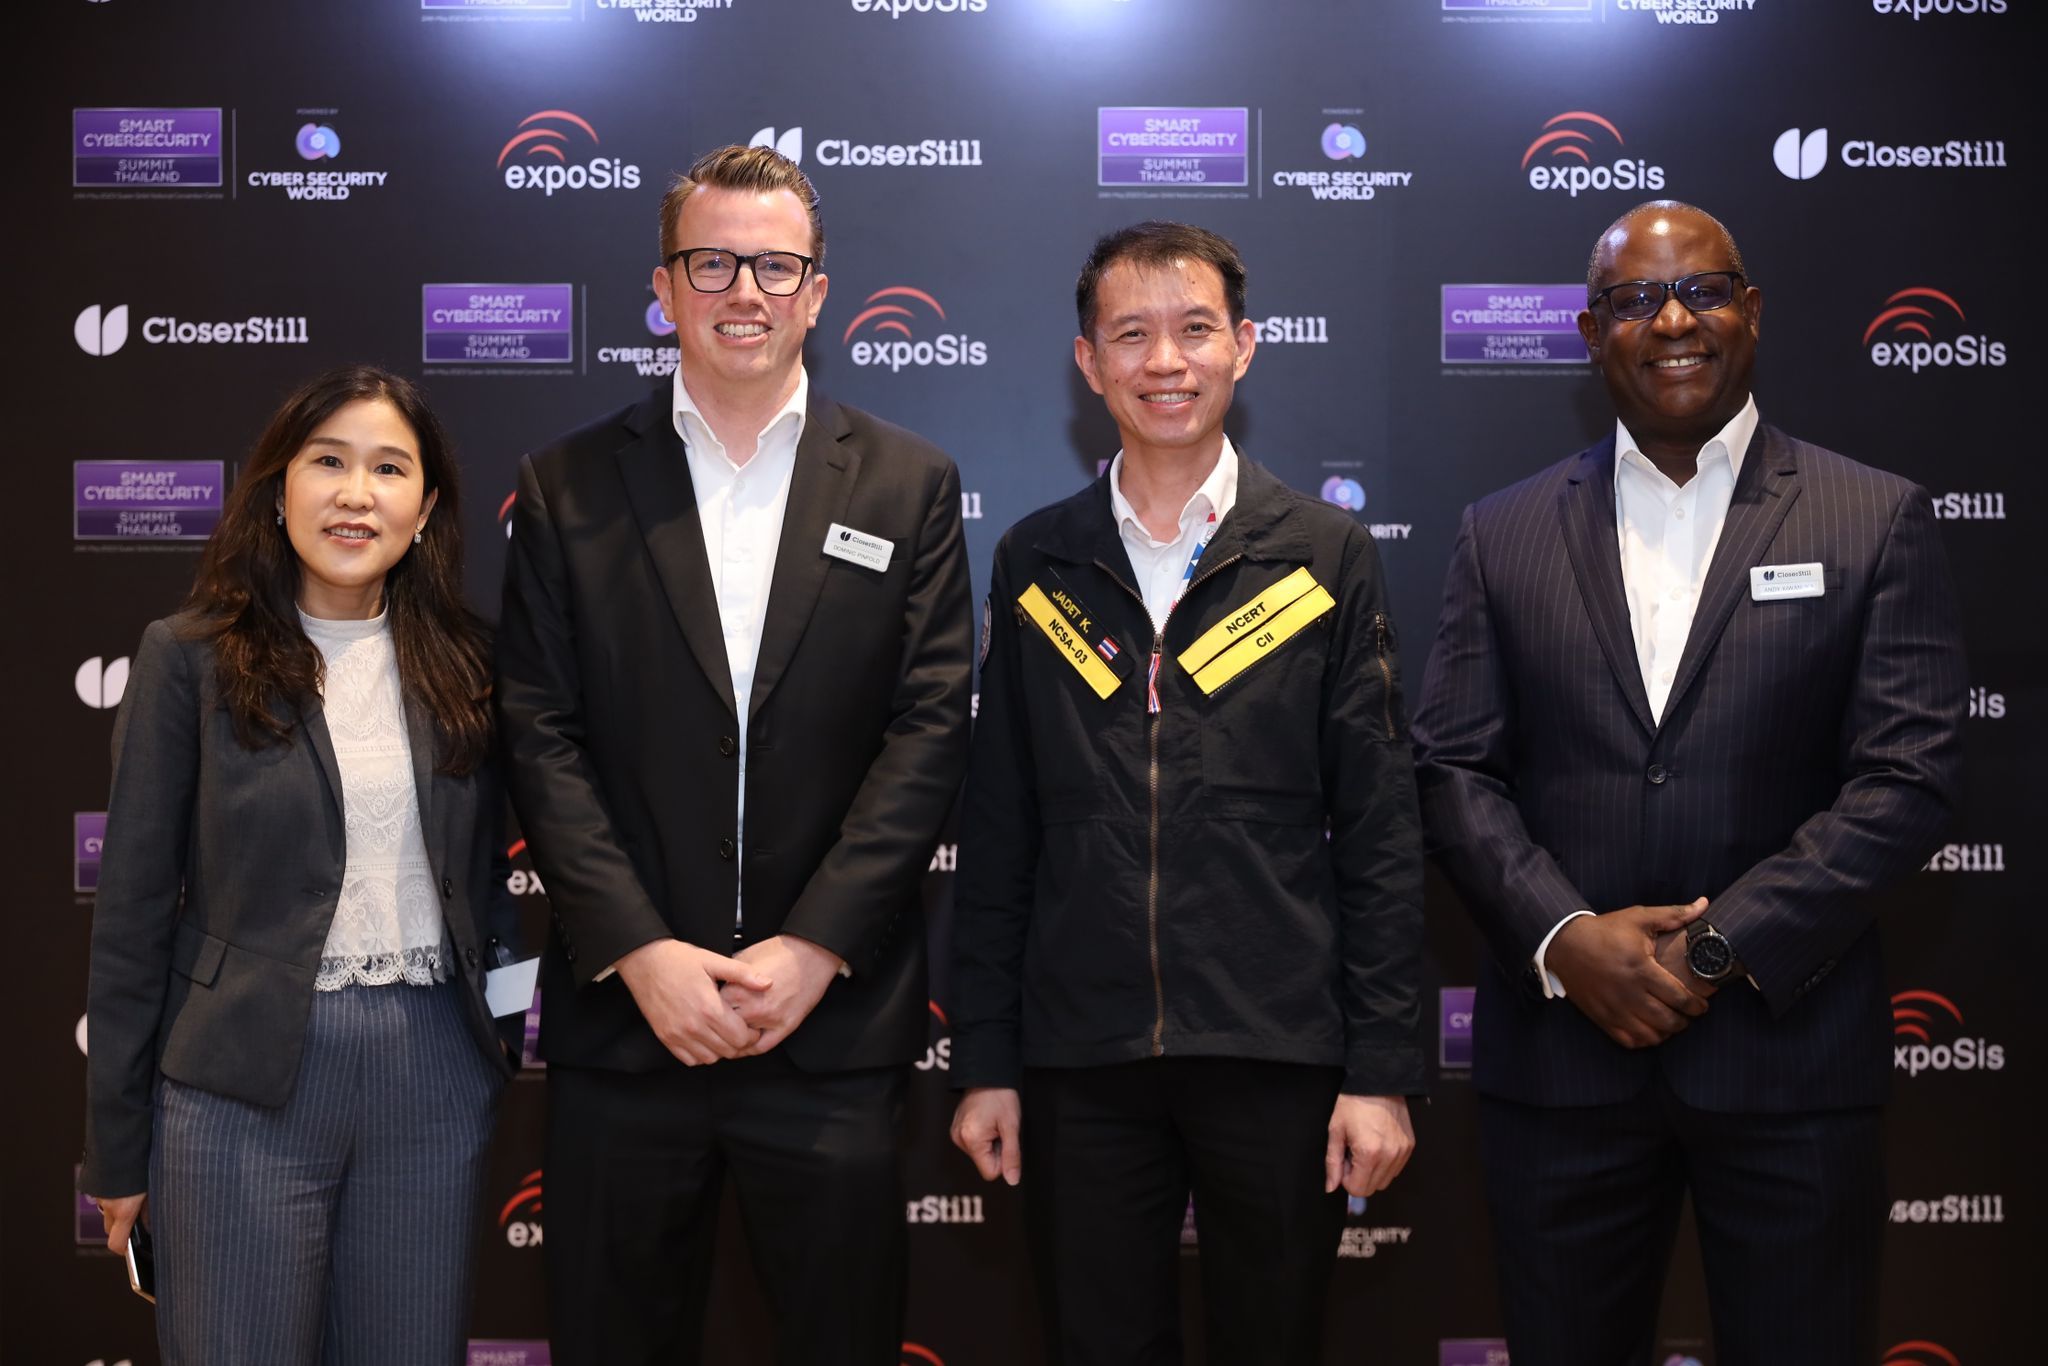 CloserStill Media, in Partnership with ExpoSis, Celebrates Launch of New Smart Cybersecurity Summit, Thailand